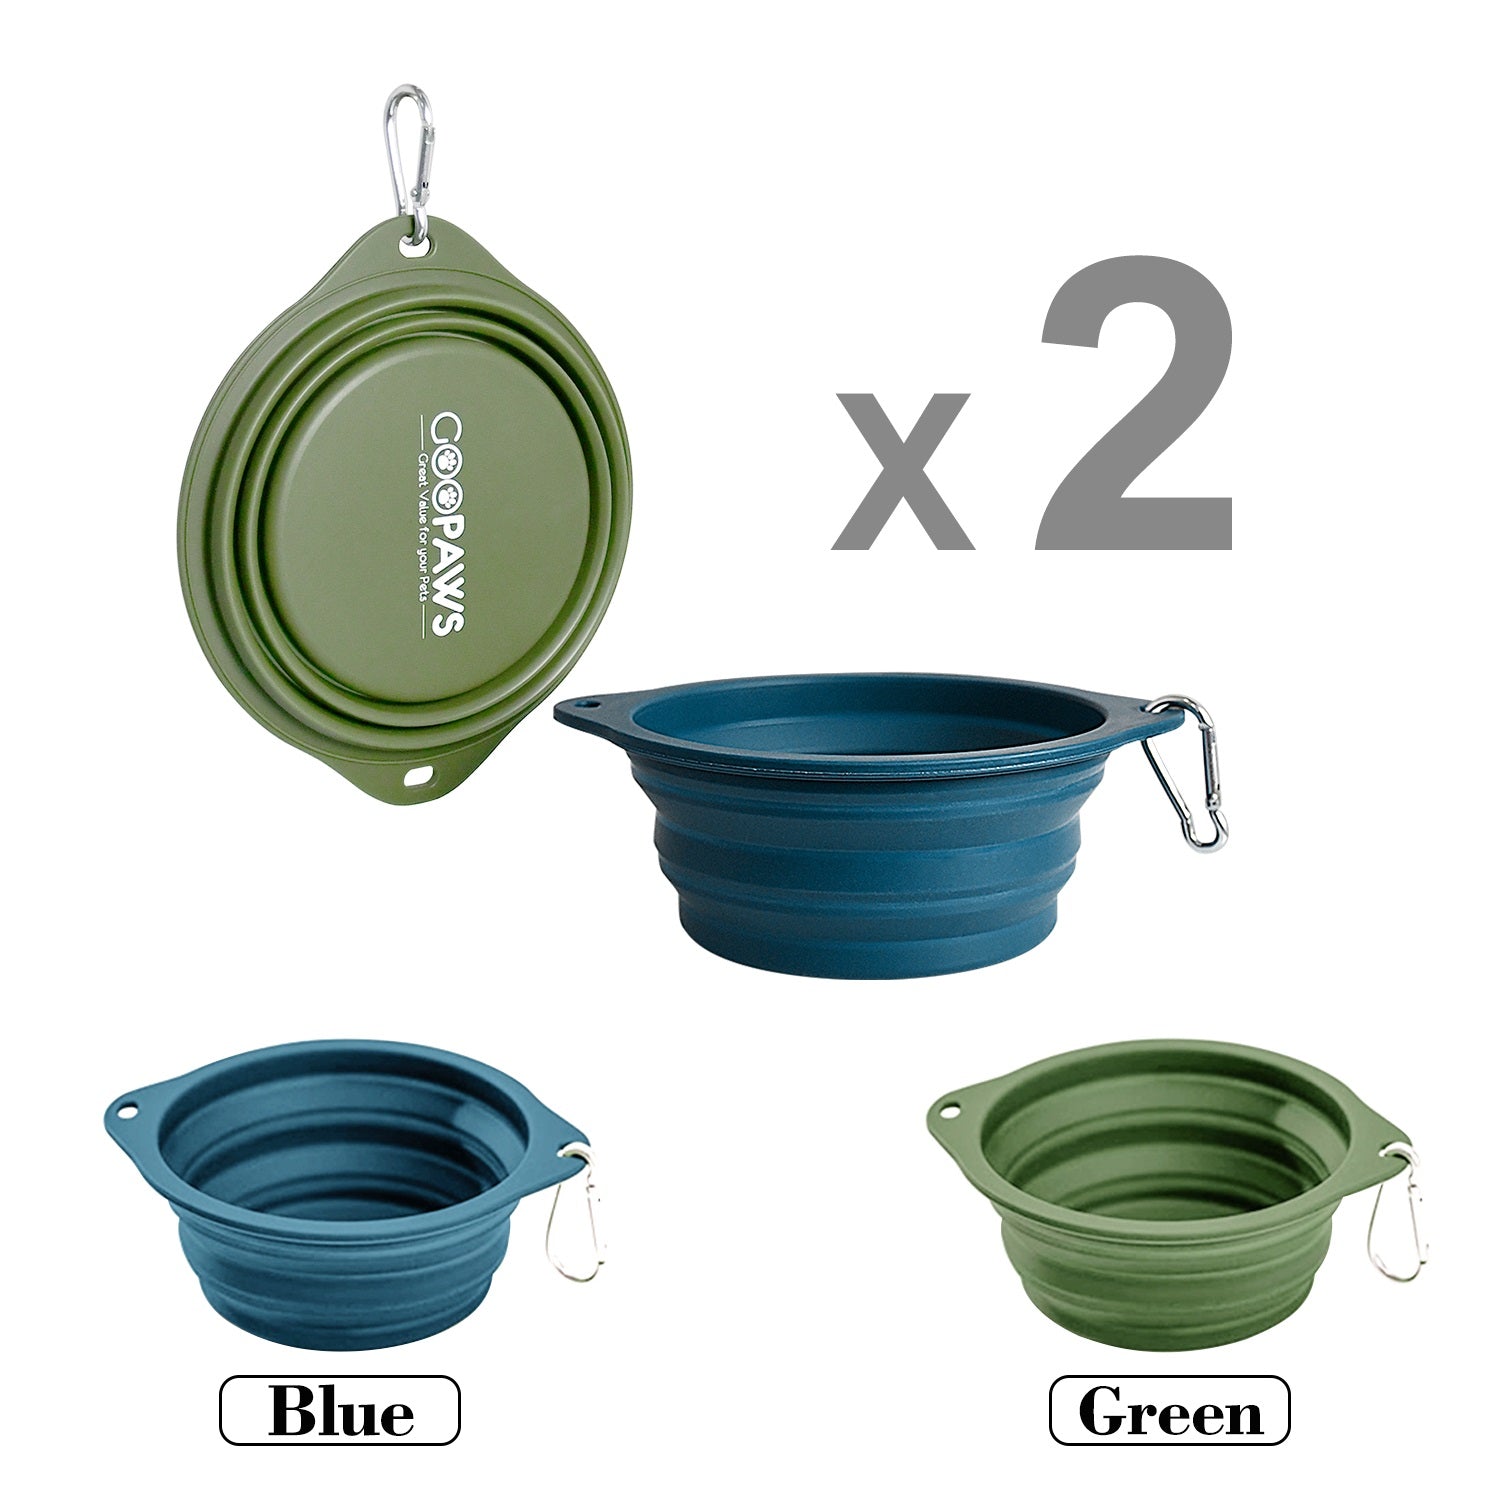 GOOPAWS 2 Pack Silicone Non-Skid Travel Dog and Cat Bowl, Blue&Green